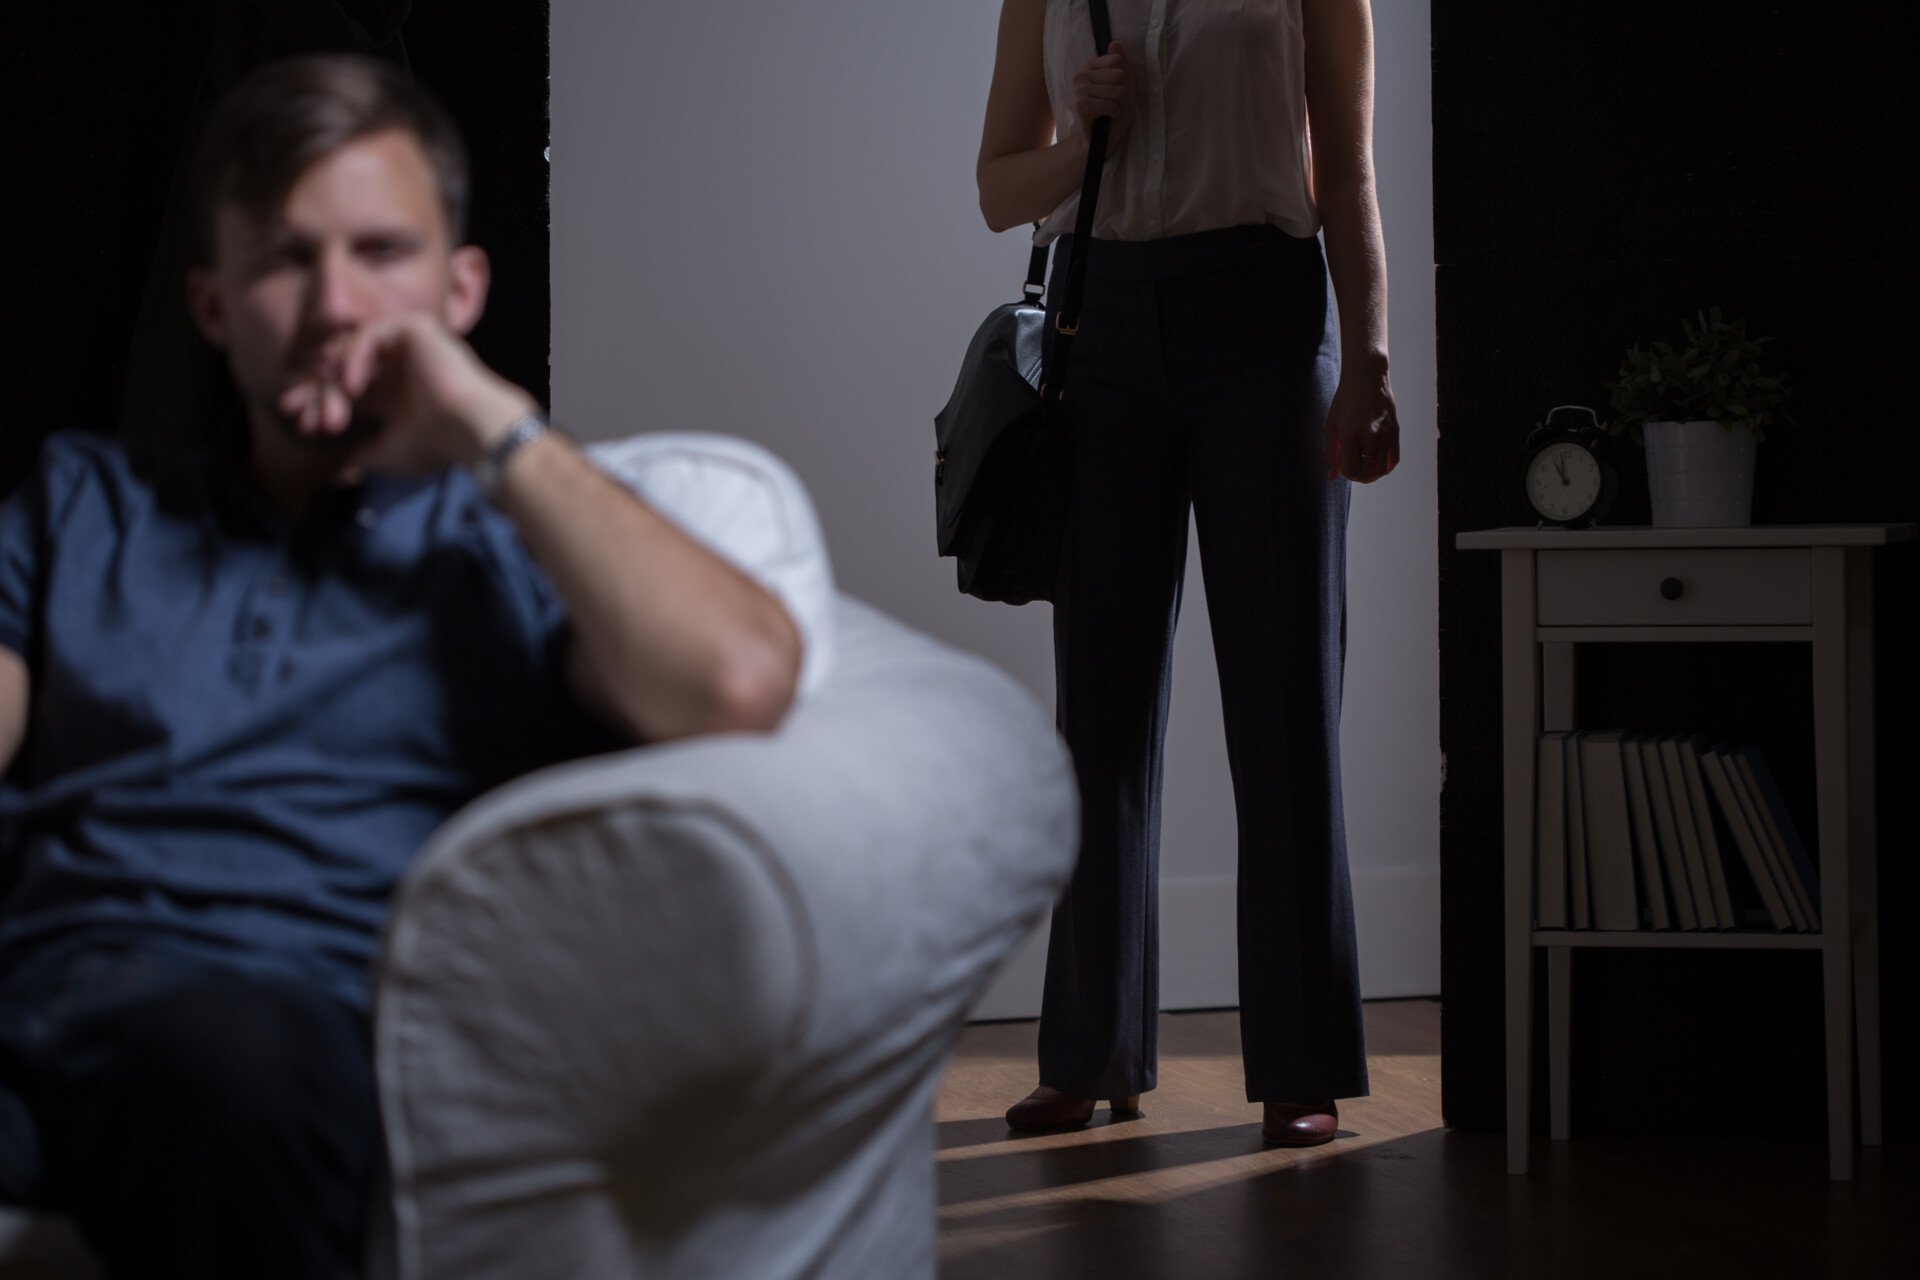 a woman stood in the doorway looking at her partner. She's holding a bag about to leave the relationship